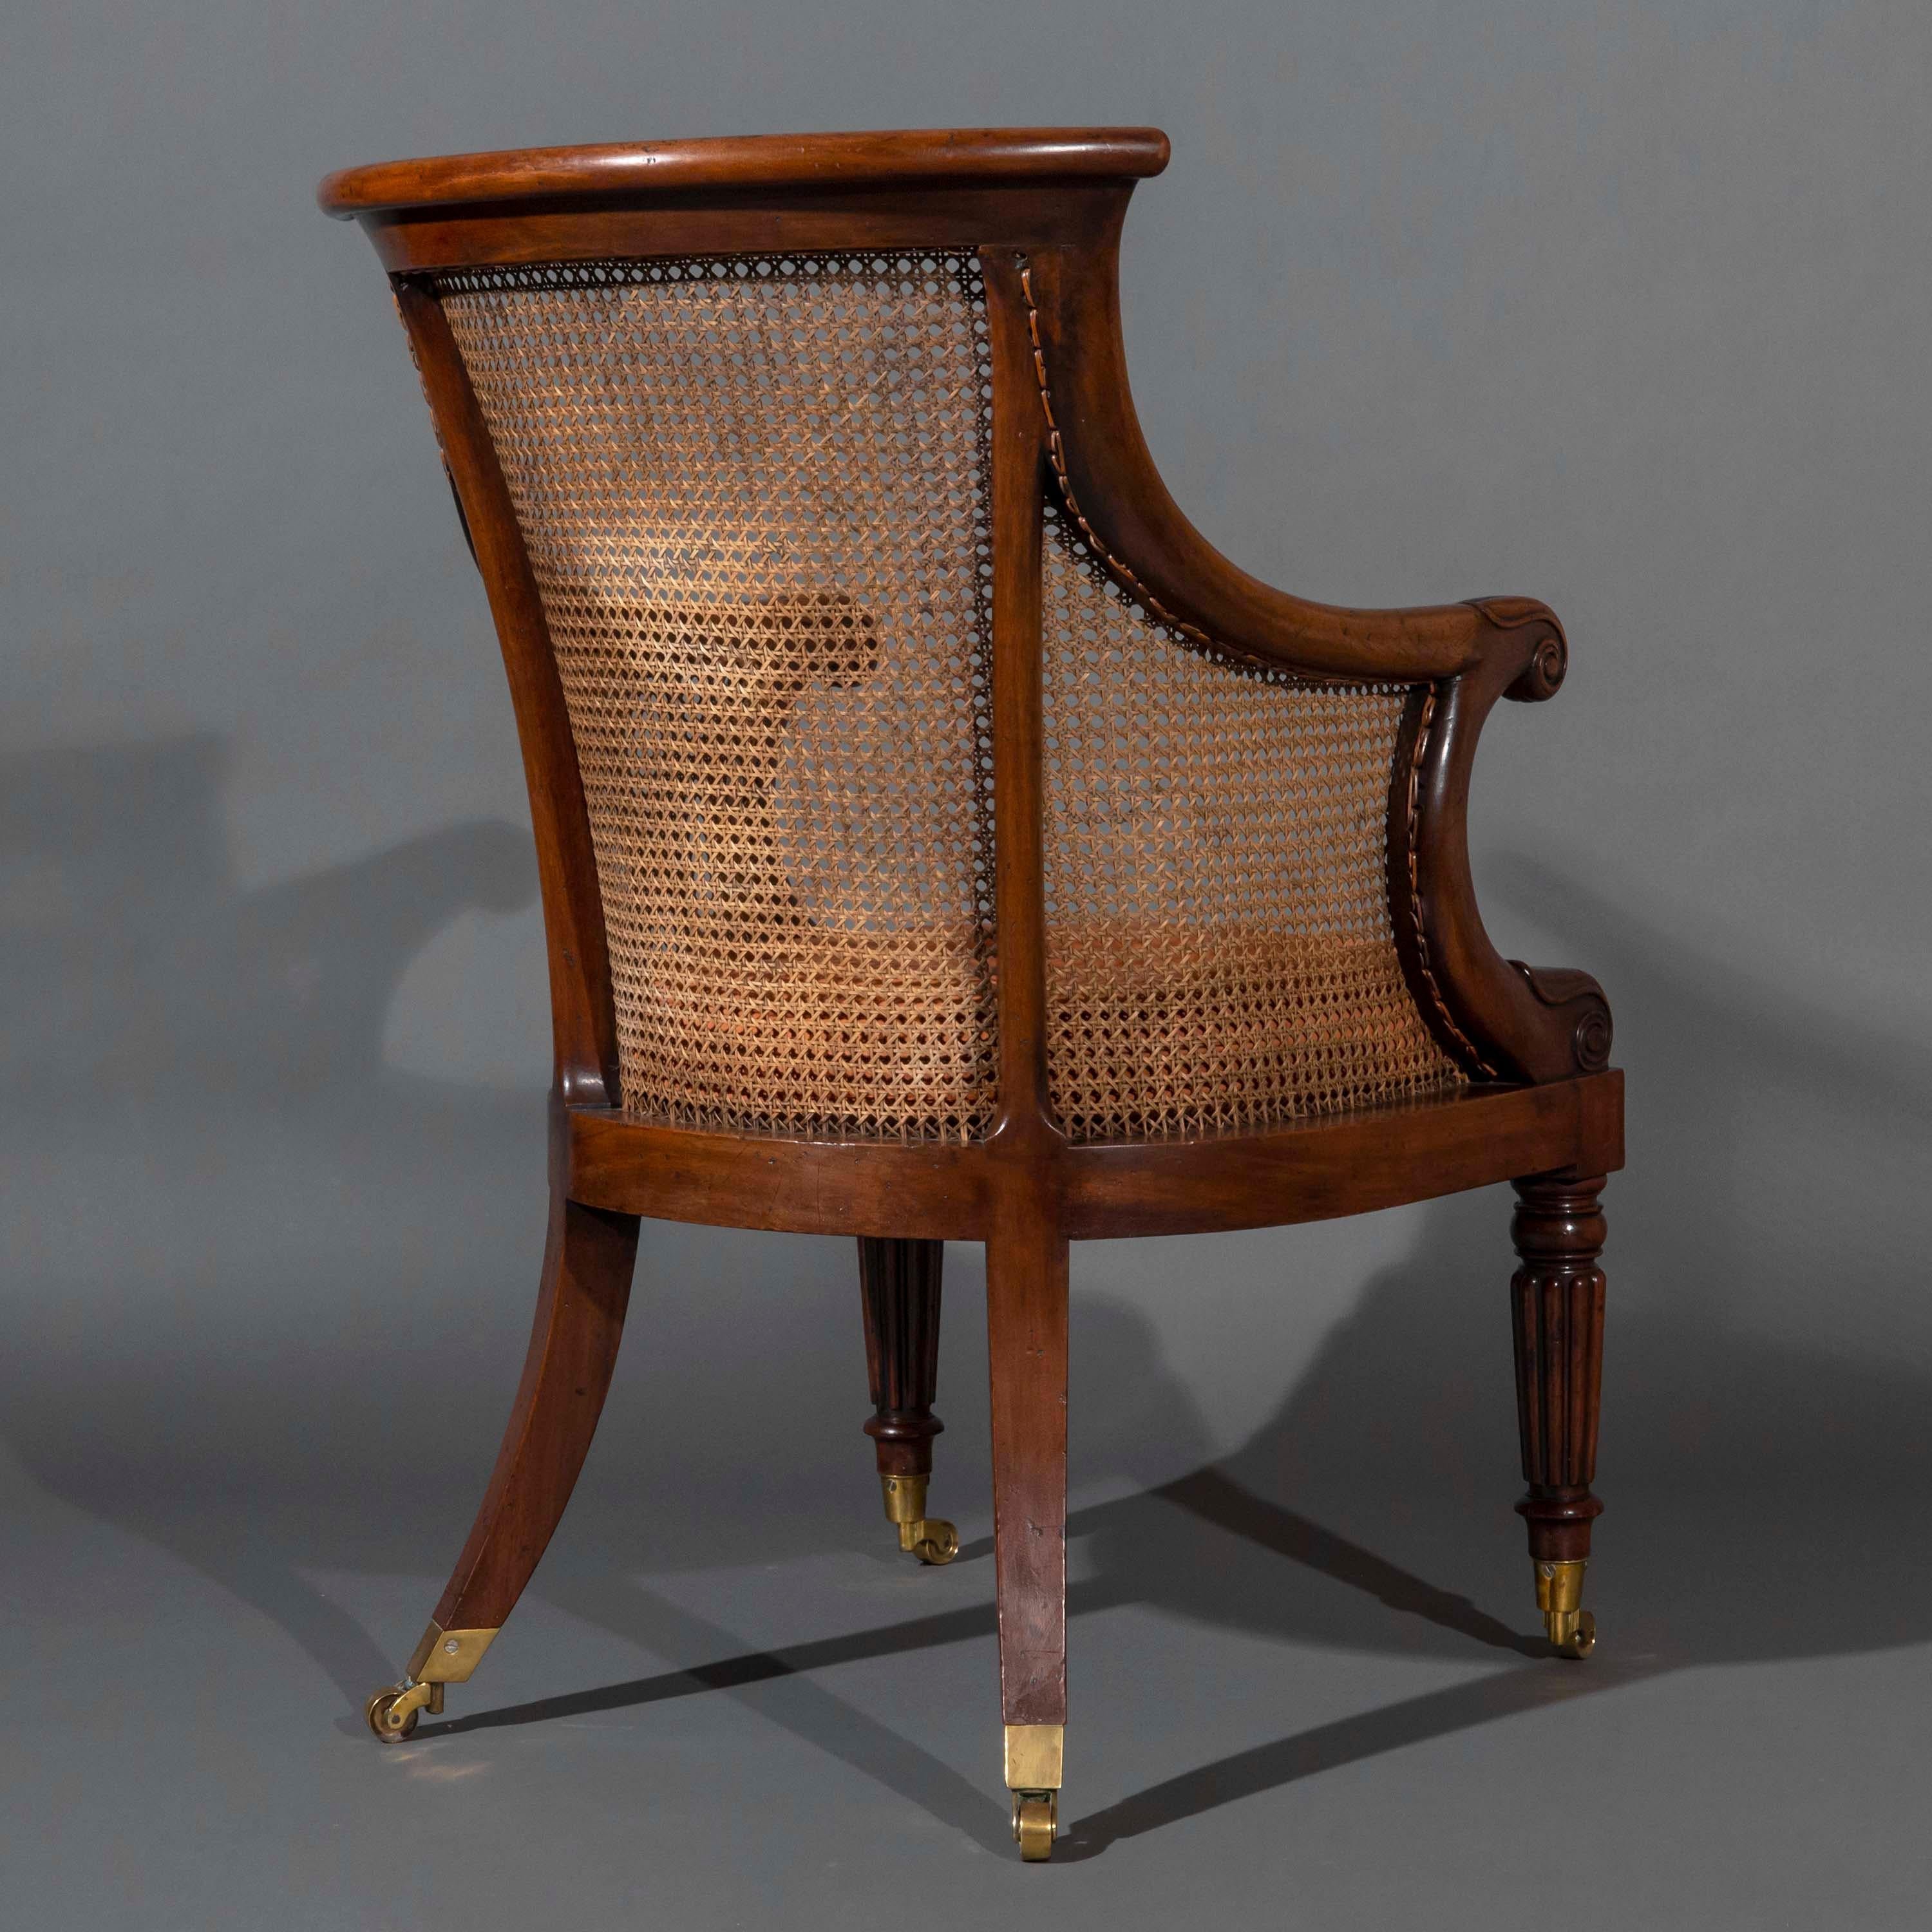 Pair of Regency Bergère Armchairs in the manner of Gillows 1